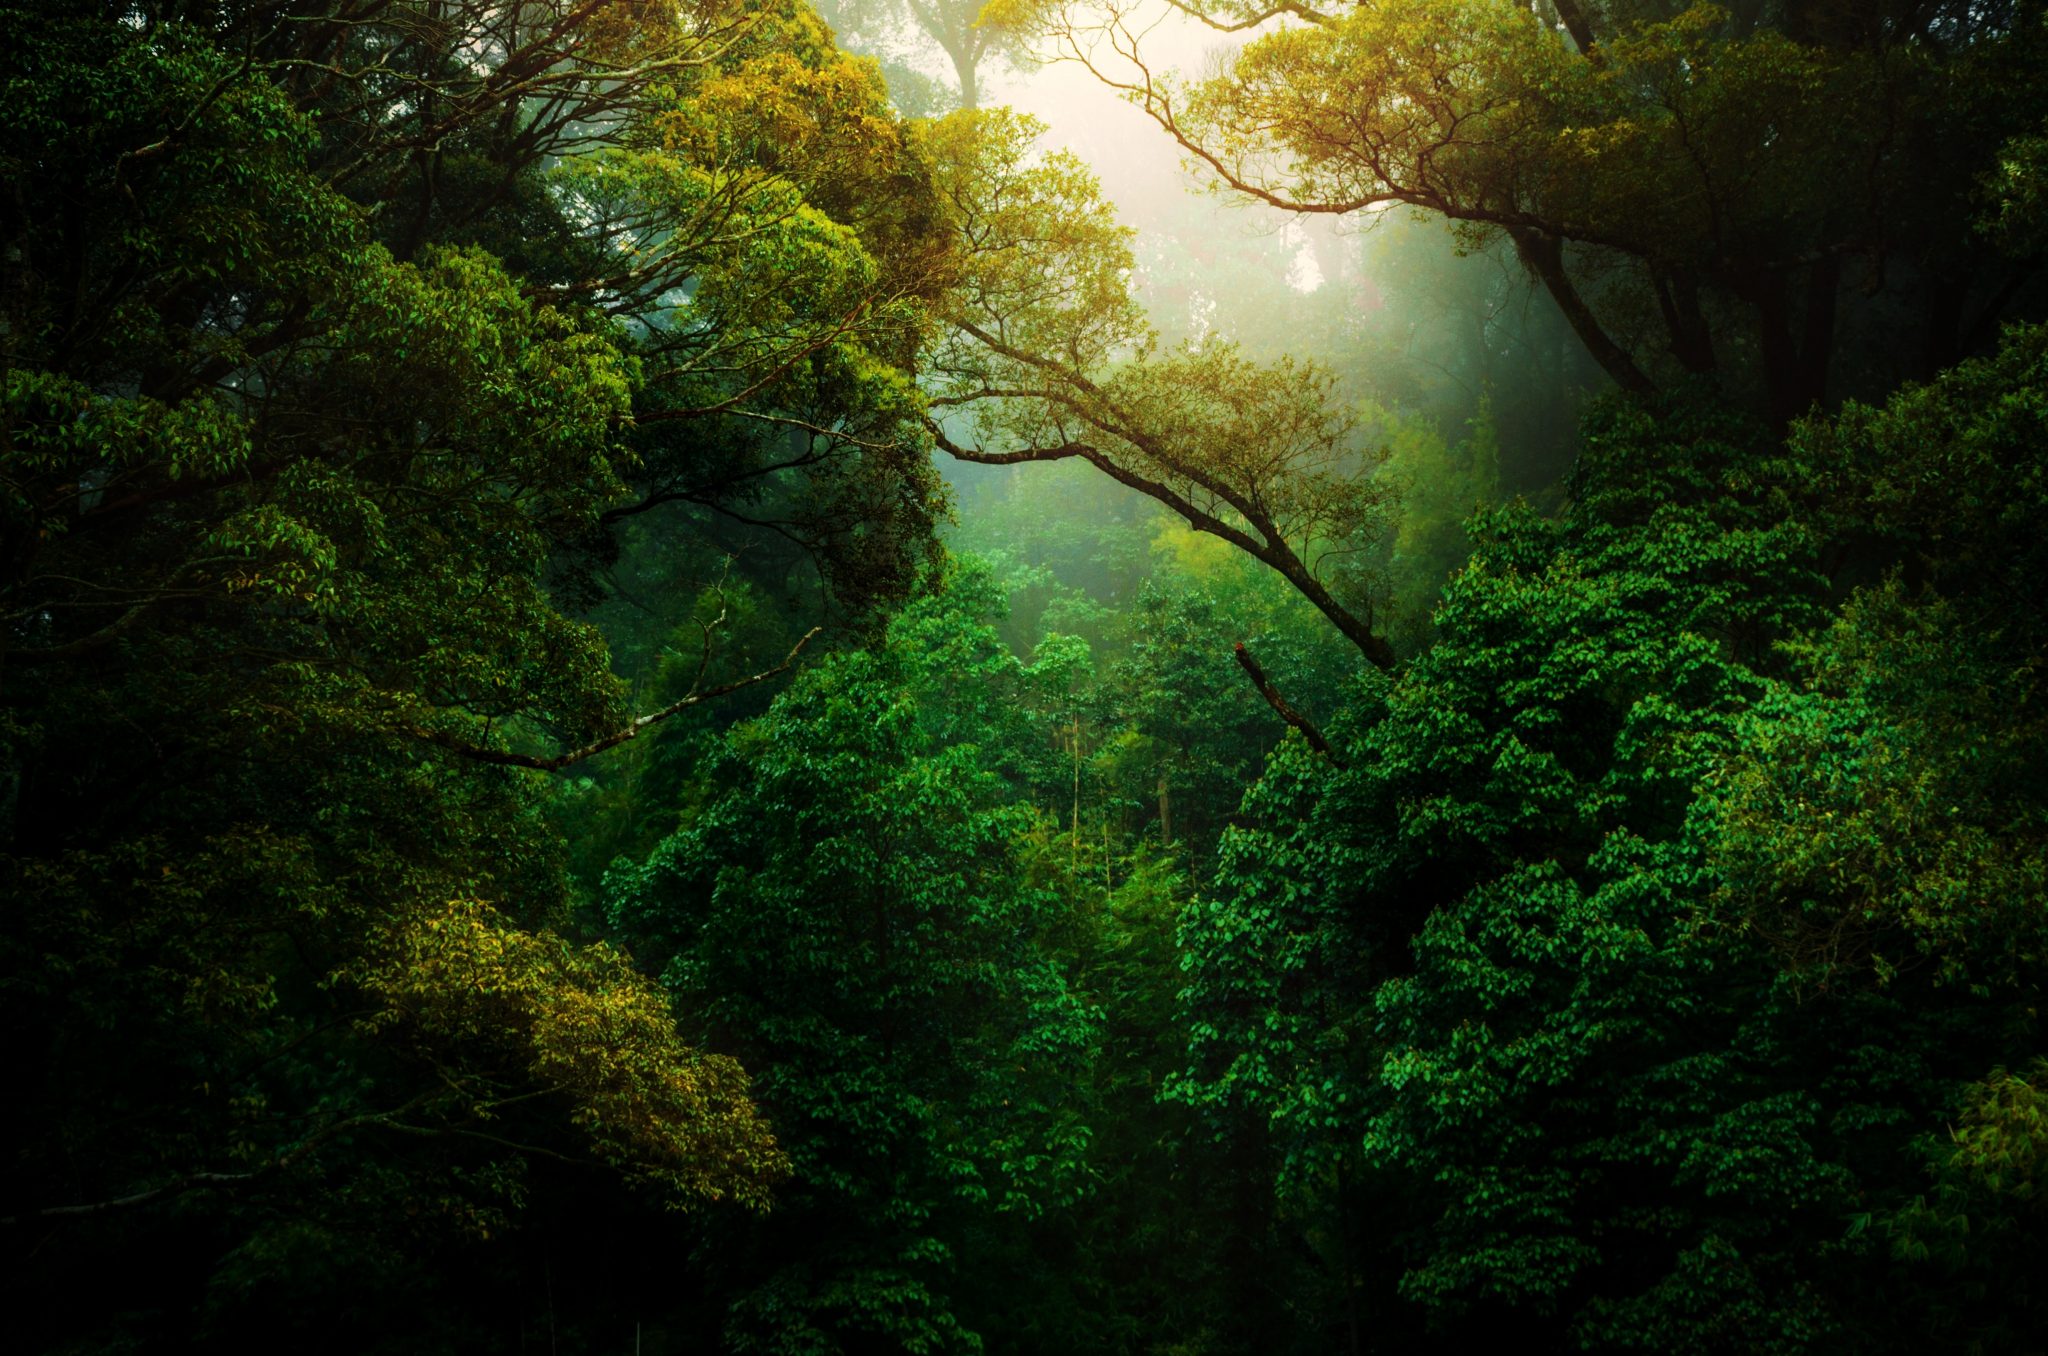 The Forbidden Forests of Meghalaya